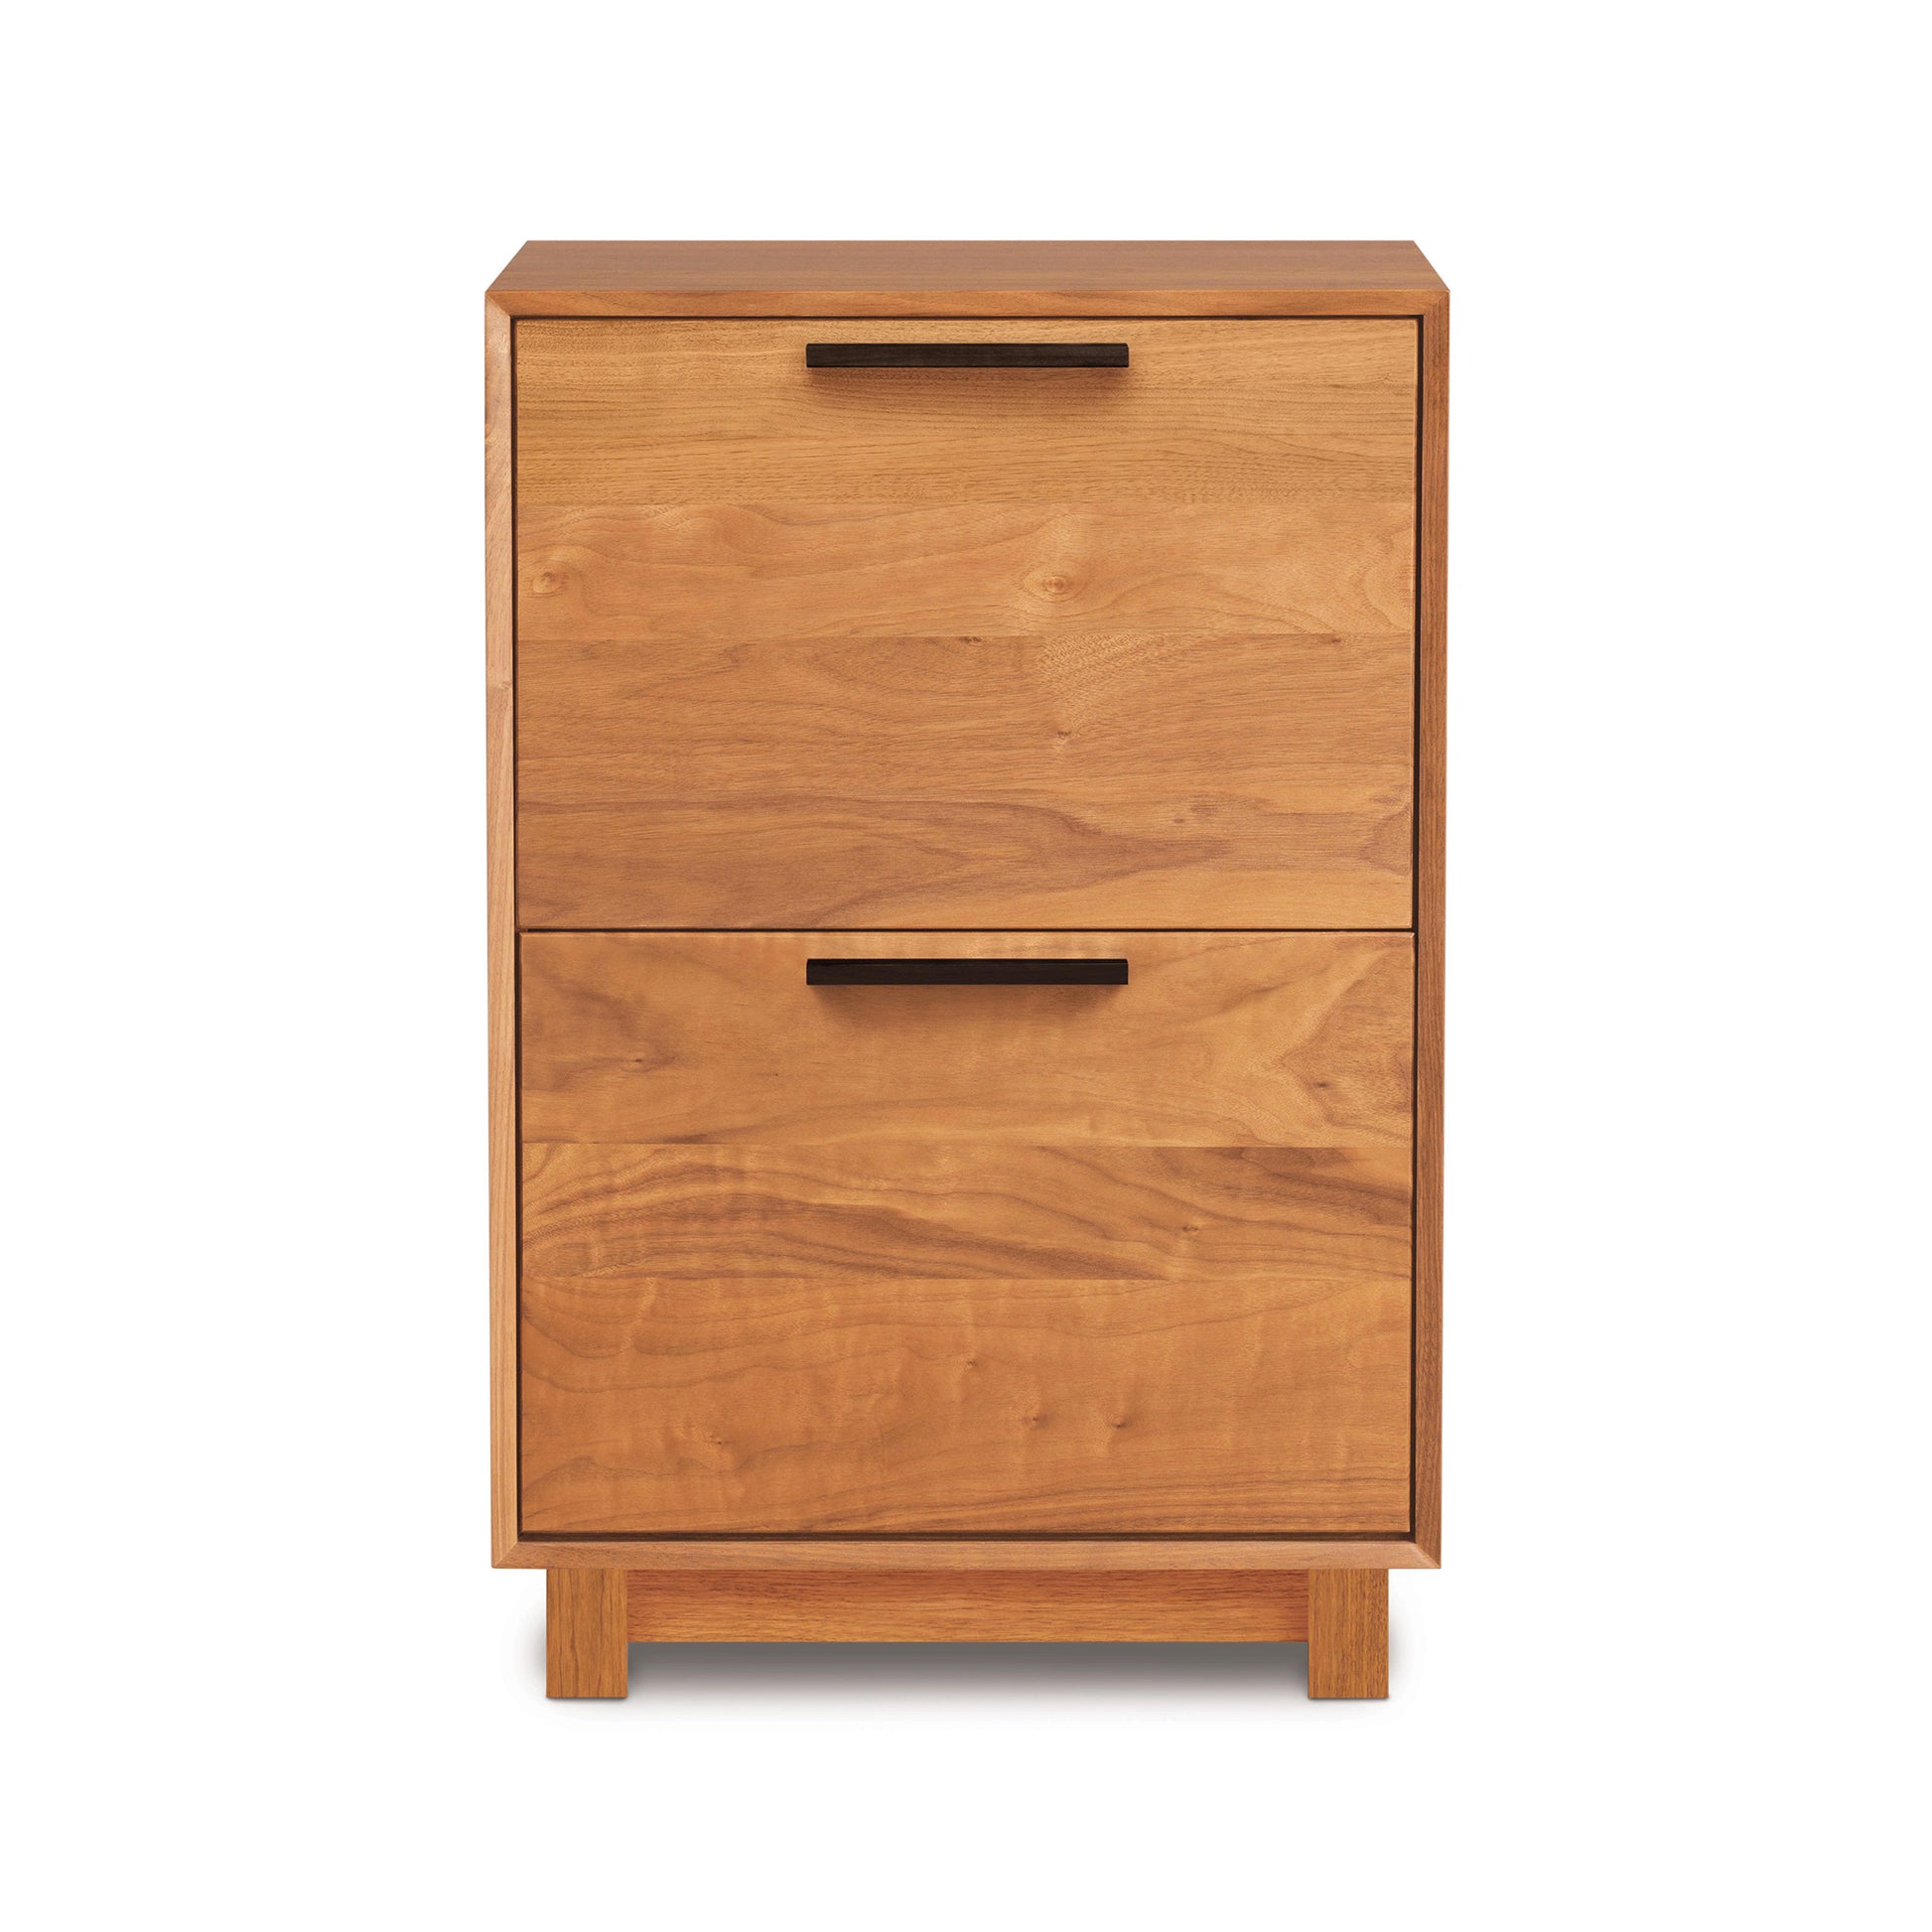 A Linear Narrow File Cabinet from Copeland Furniture, made of natural wood and featuring two drawers, isolated on a white background.